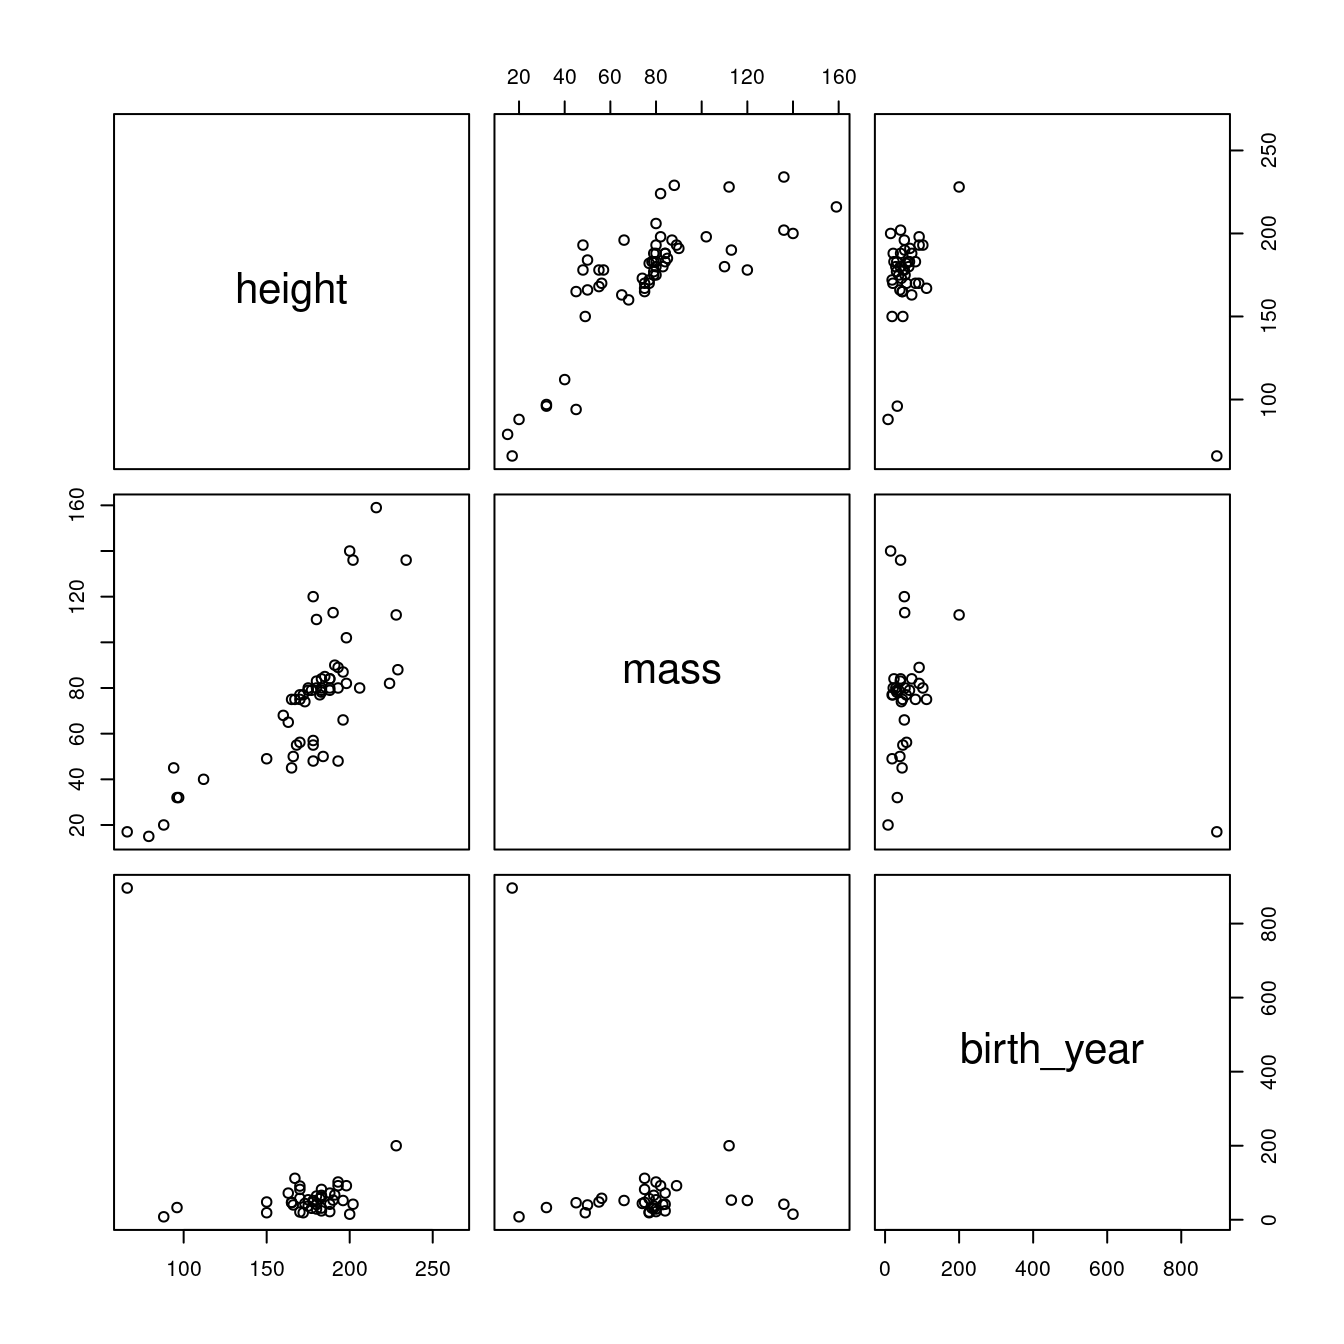 Pairwise correlations for the starwars dataset after removing outlying mass value.